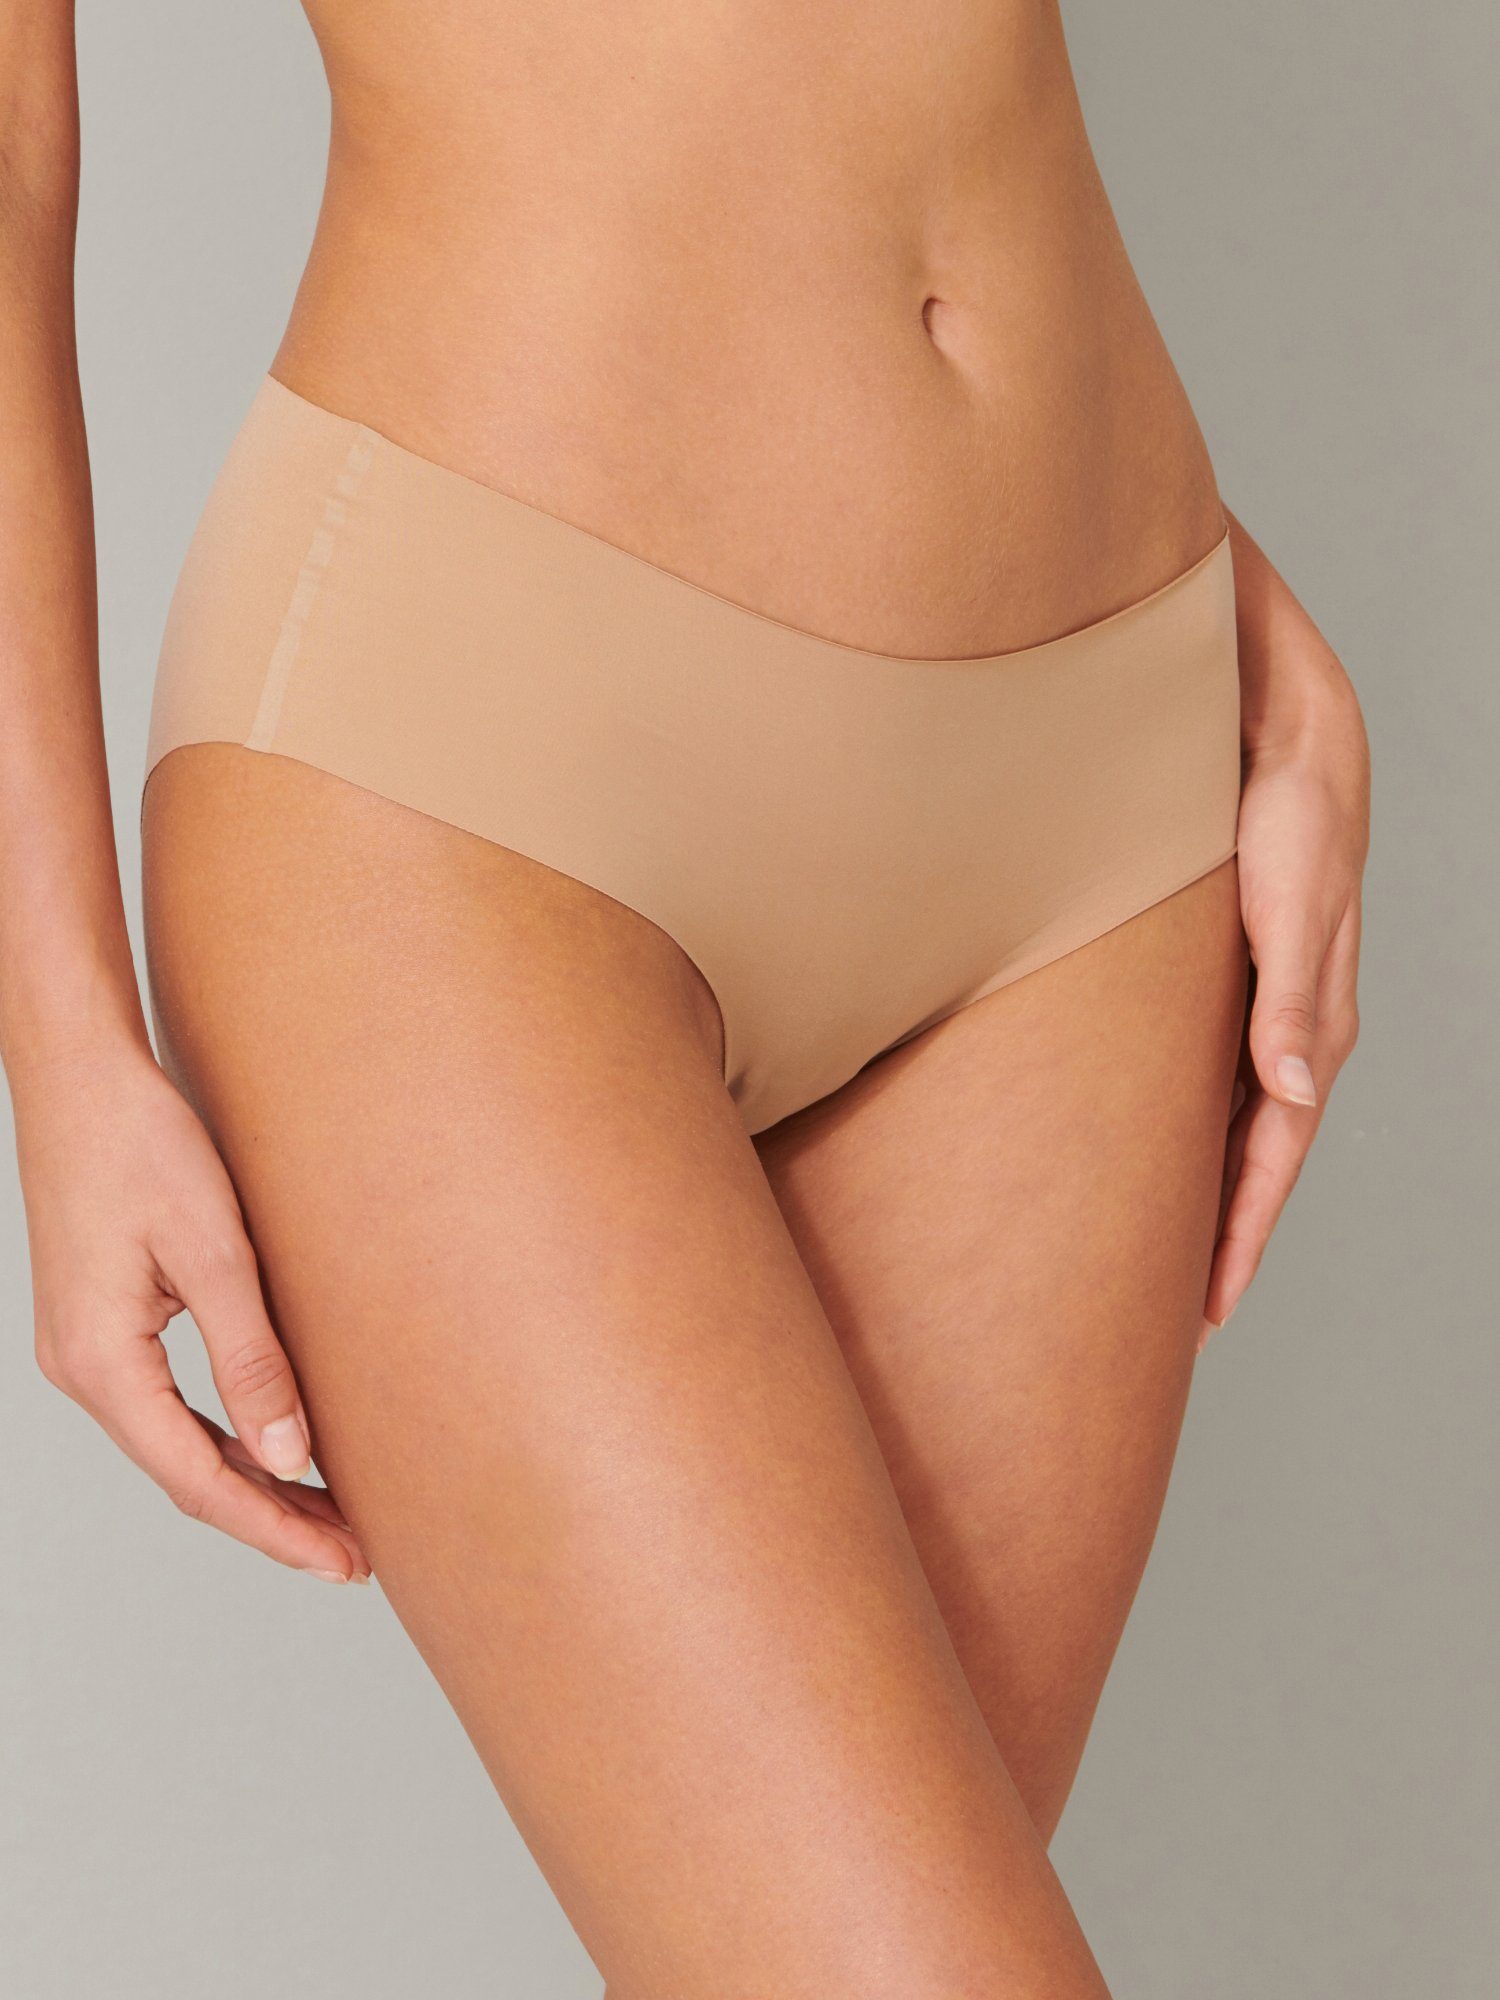 Invisible maple Light Schiesser Panty